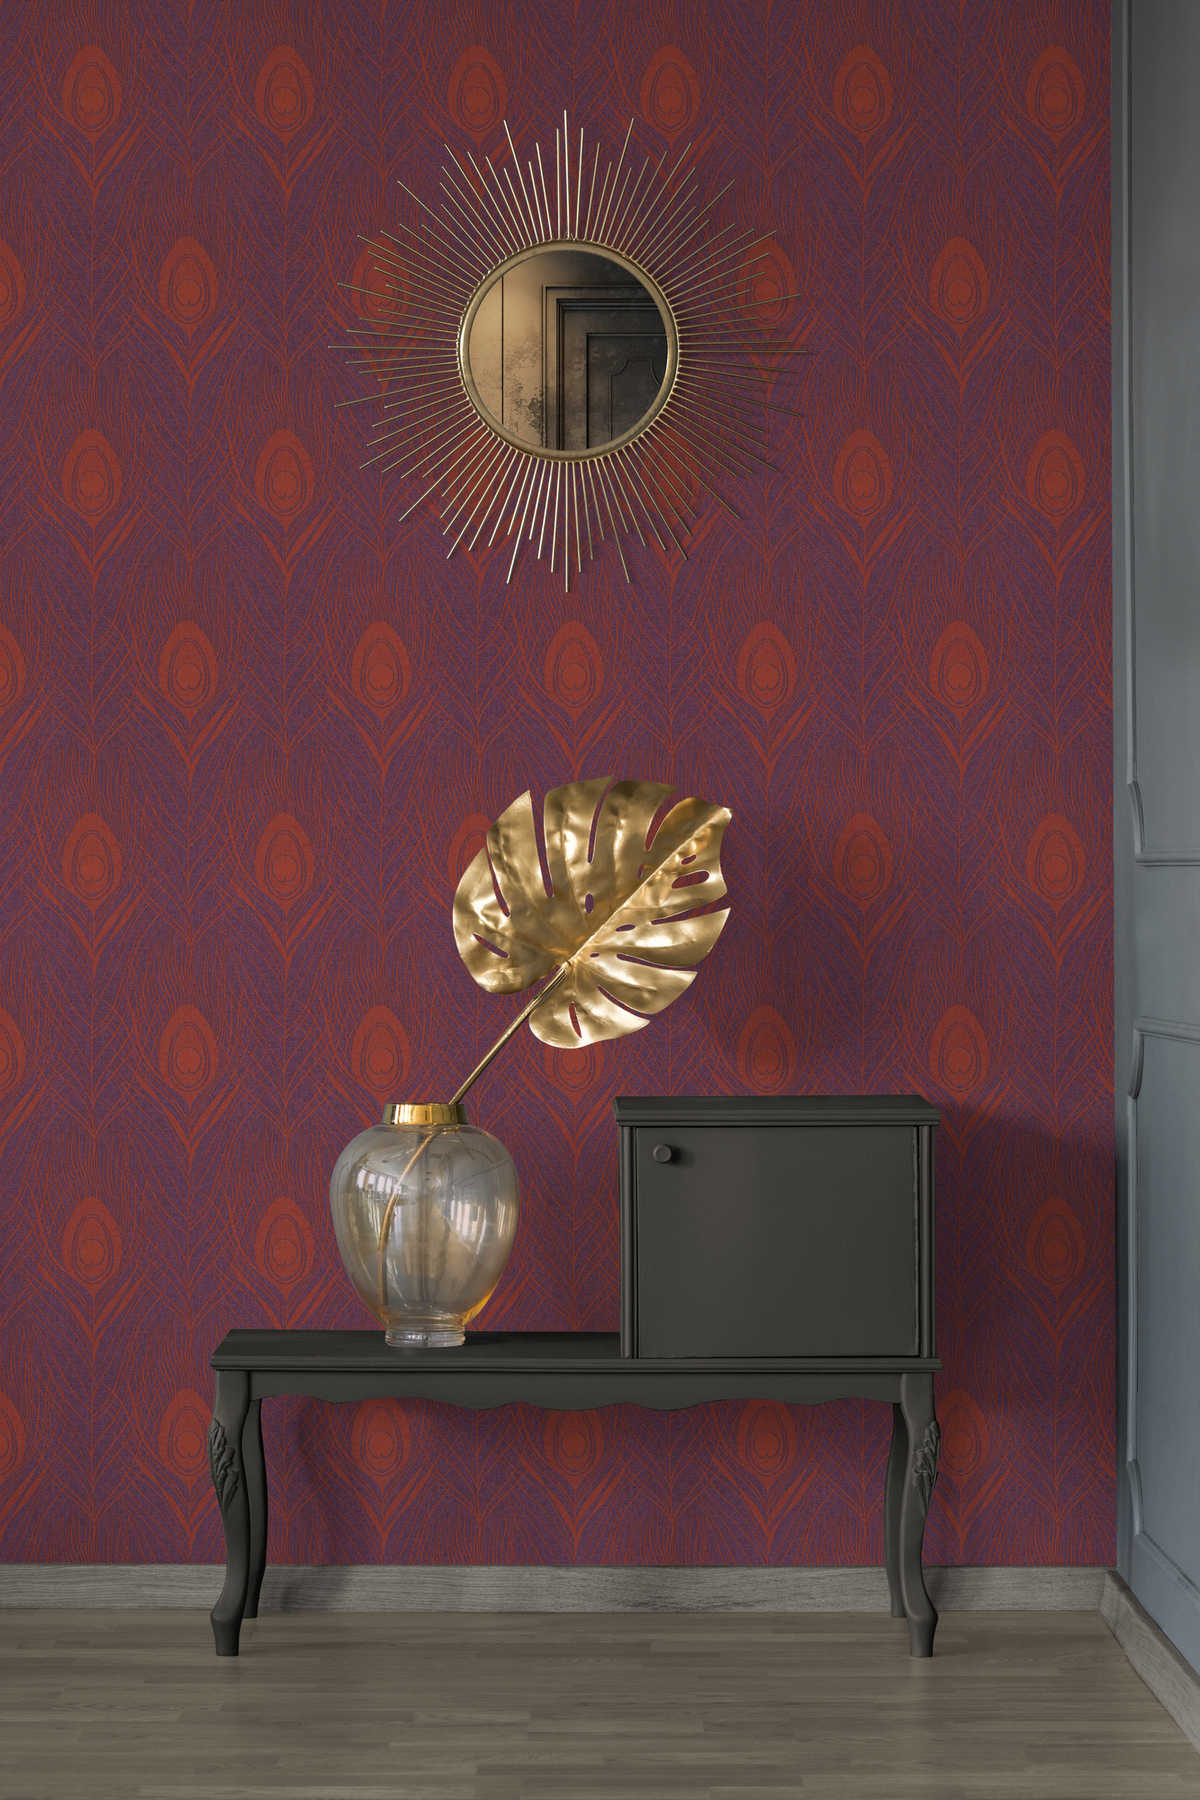             Magenta non-woven wallpaper with peacock feathers - red, purple, gold
        